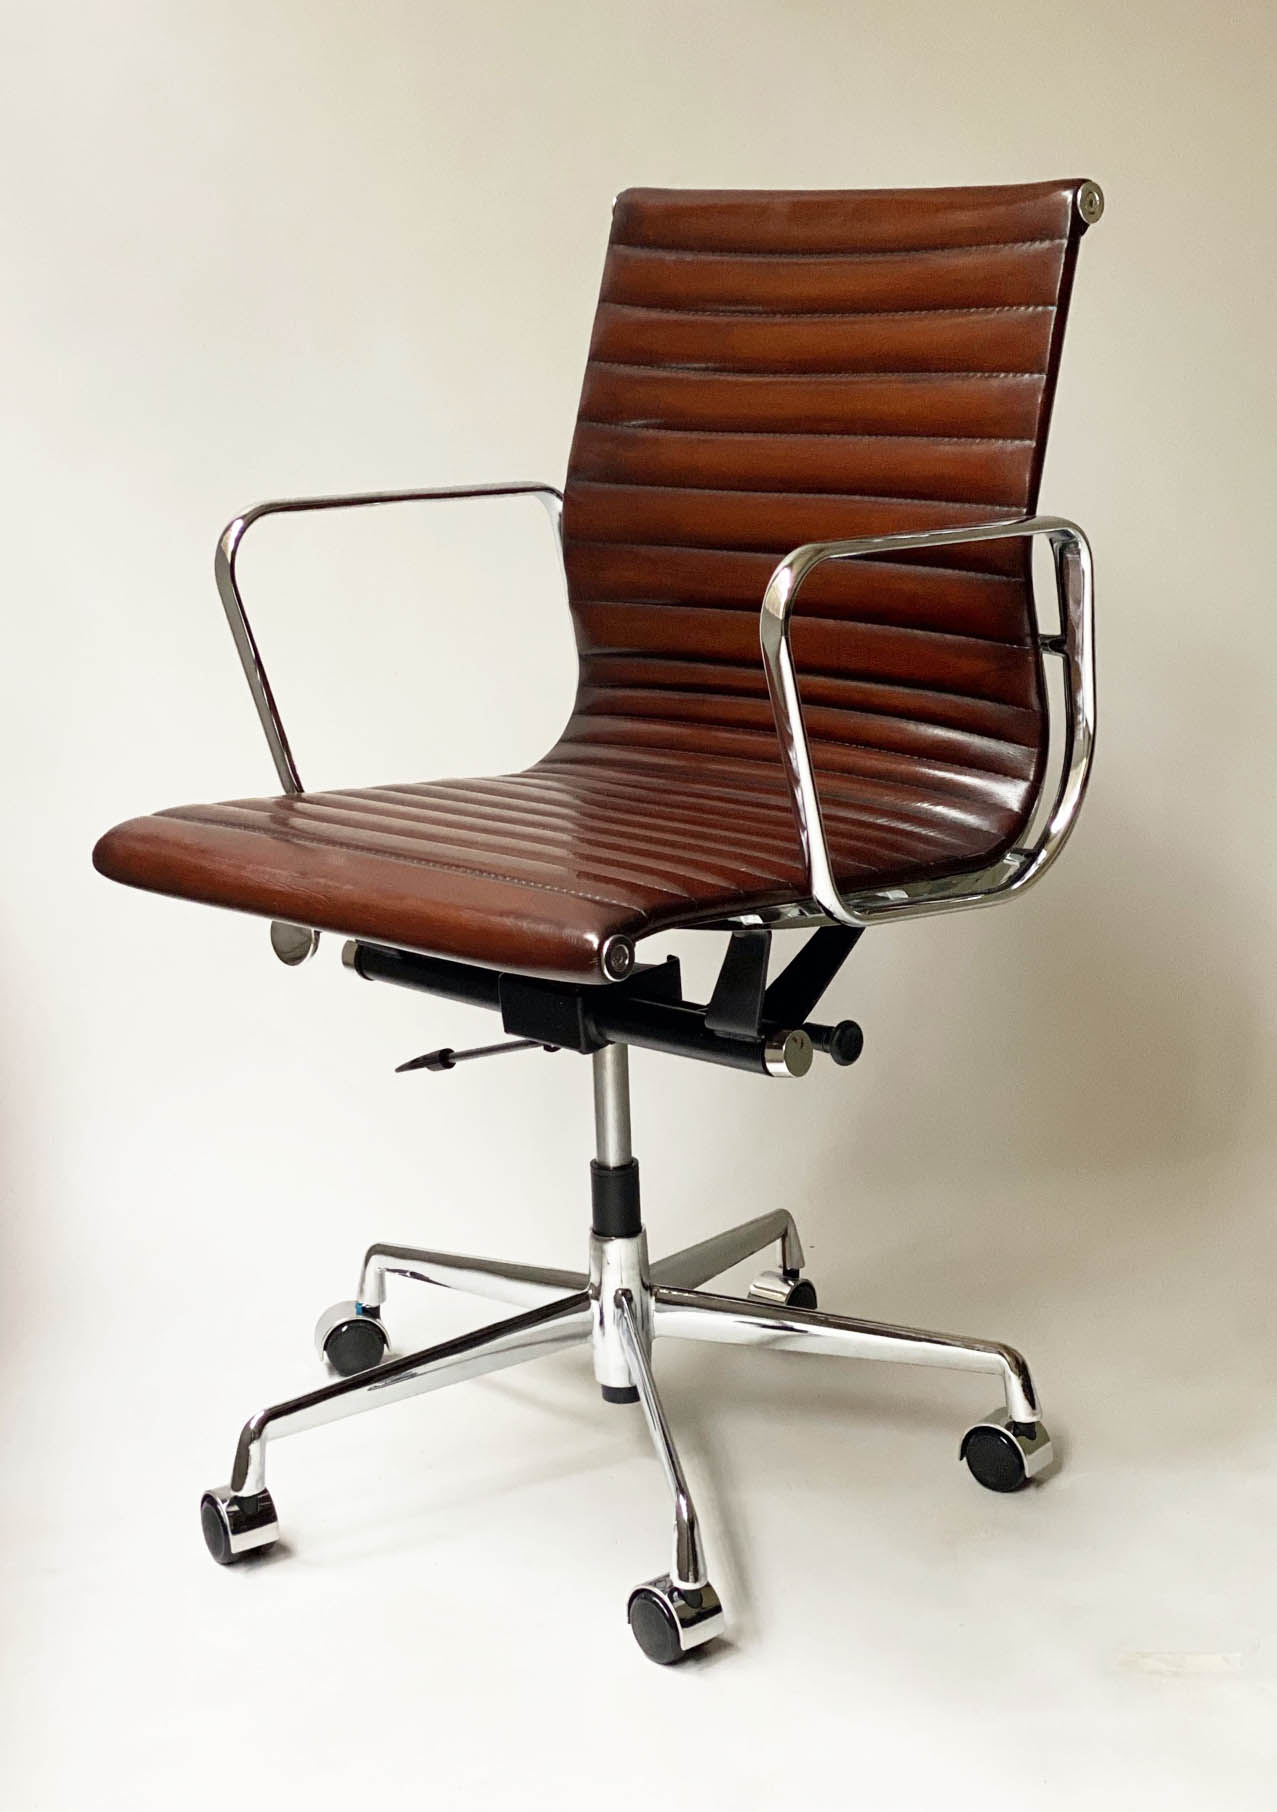 REVOLVING DESK CHAIR, Charles and Ray Eames inspired ribbed, mid brown leather, revolving and